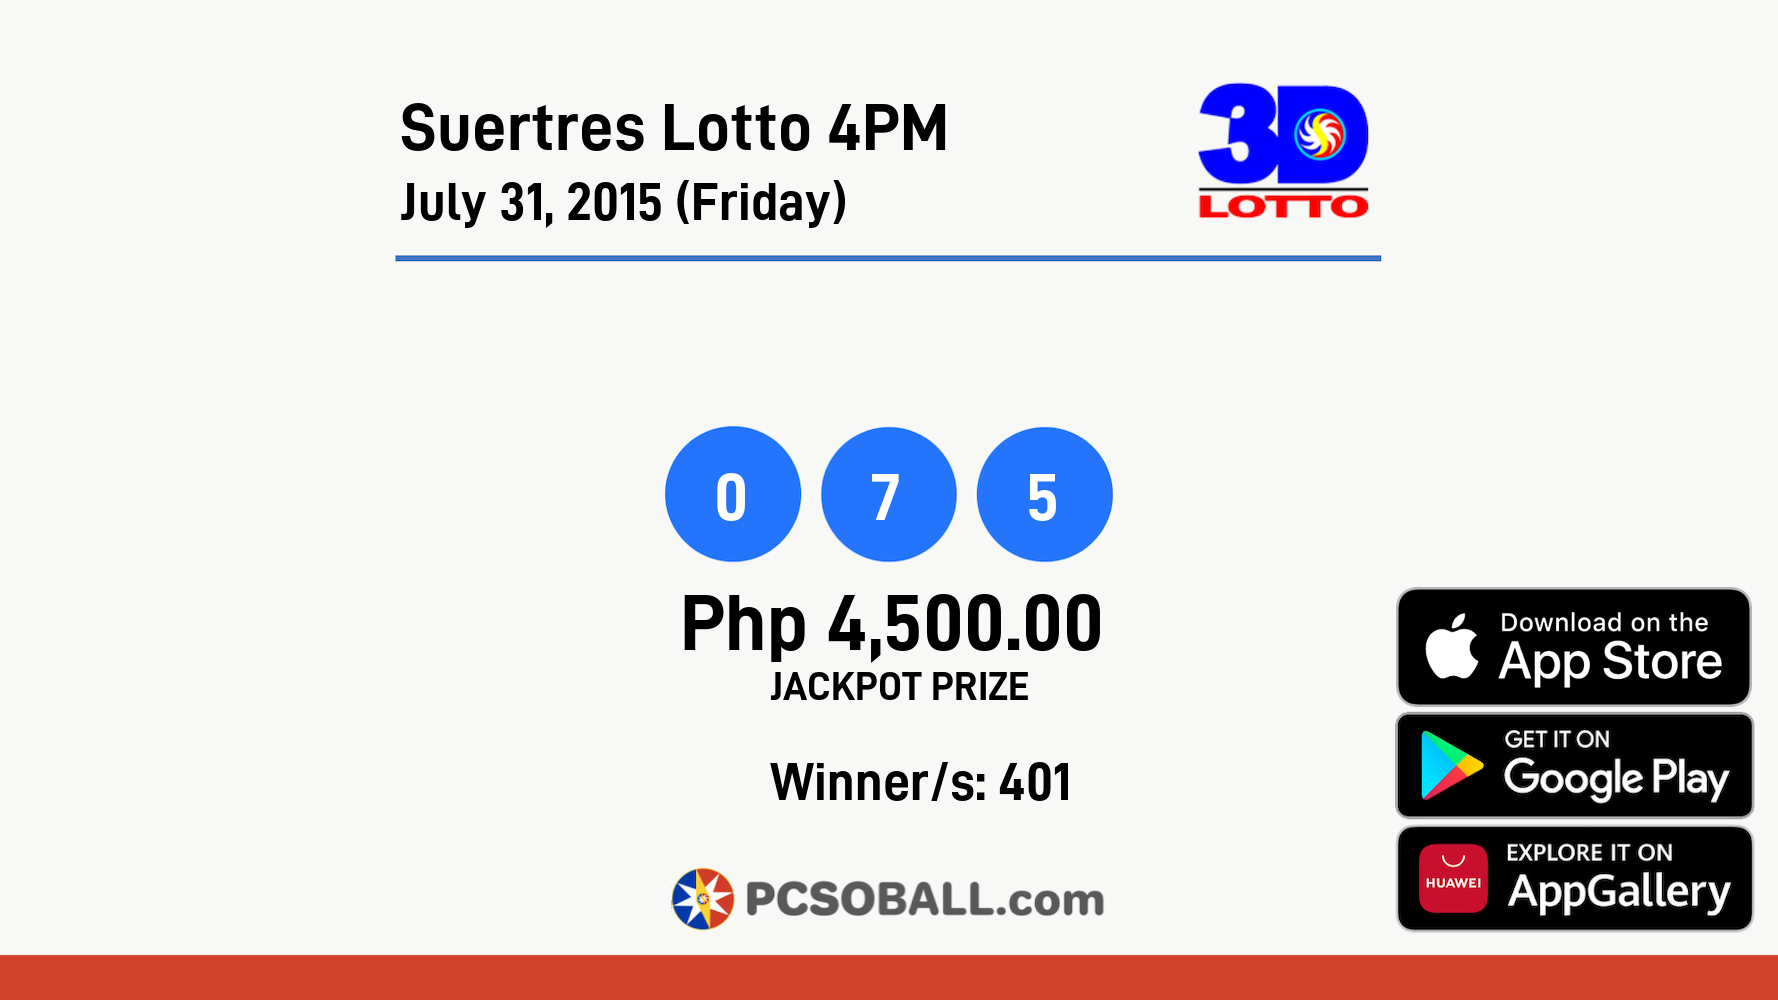 Suertres Lotto 4PM July 31, 2015 (Friday) Result